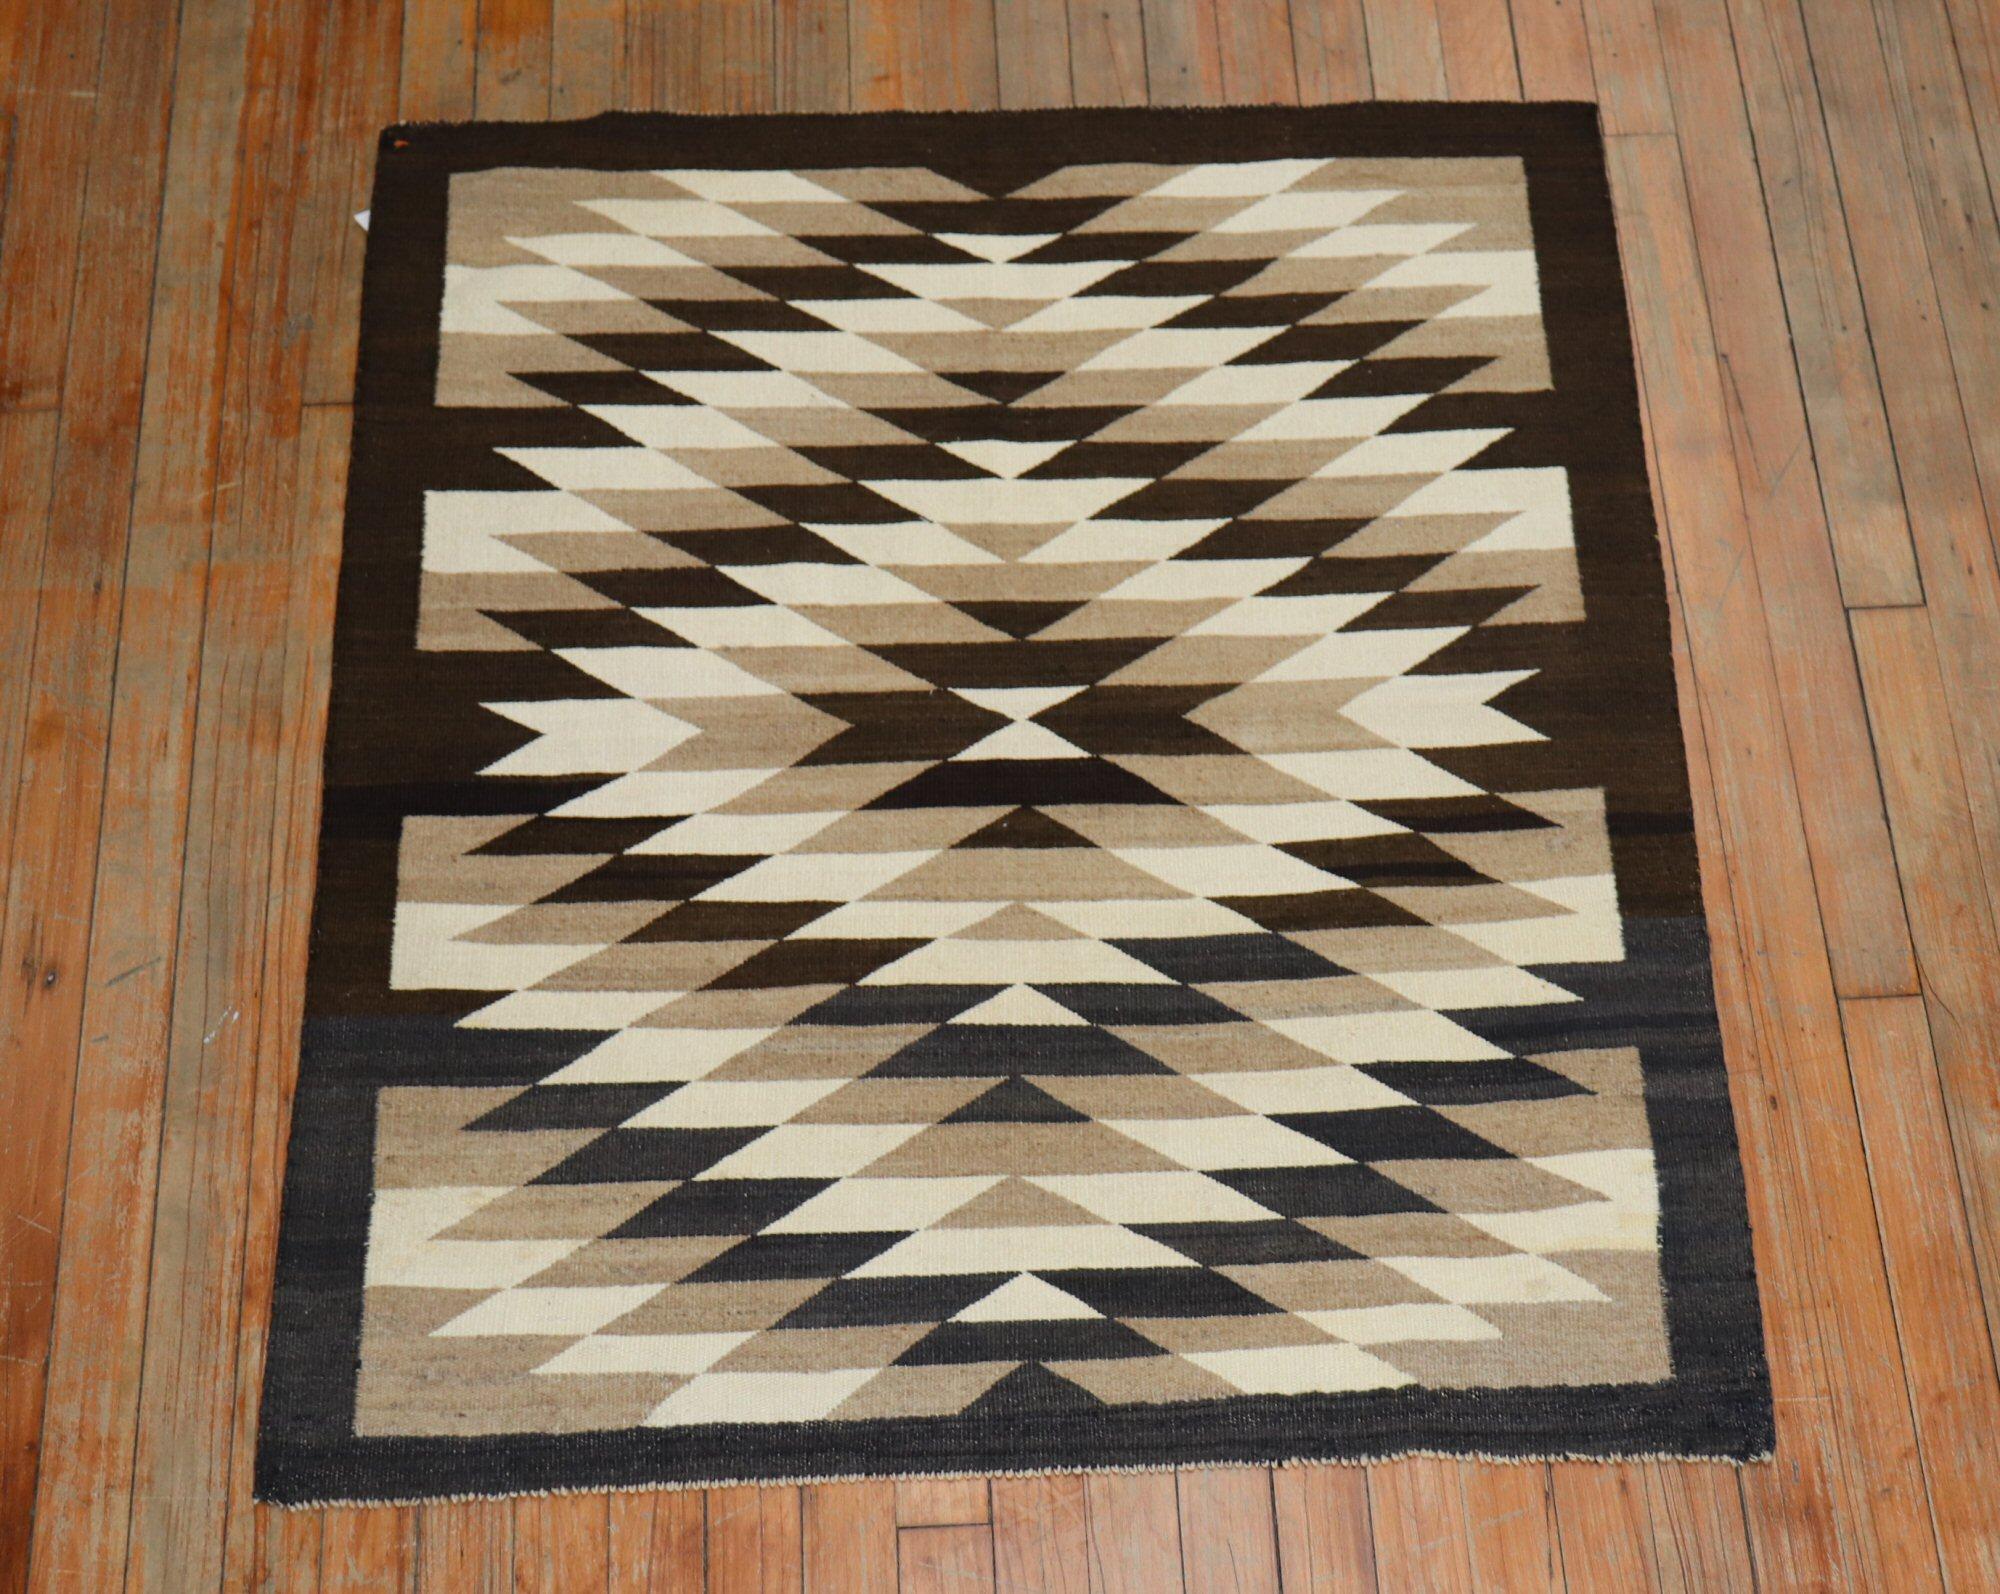 A highly decorative 20th century American Navajo rug with an all-over geometric tribal design in brown, charcoal, camel, and ivory

Measures: 3' x 3'8''.
 